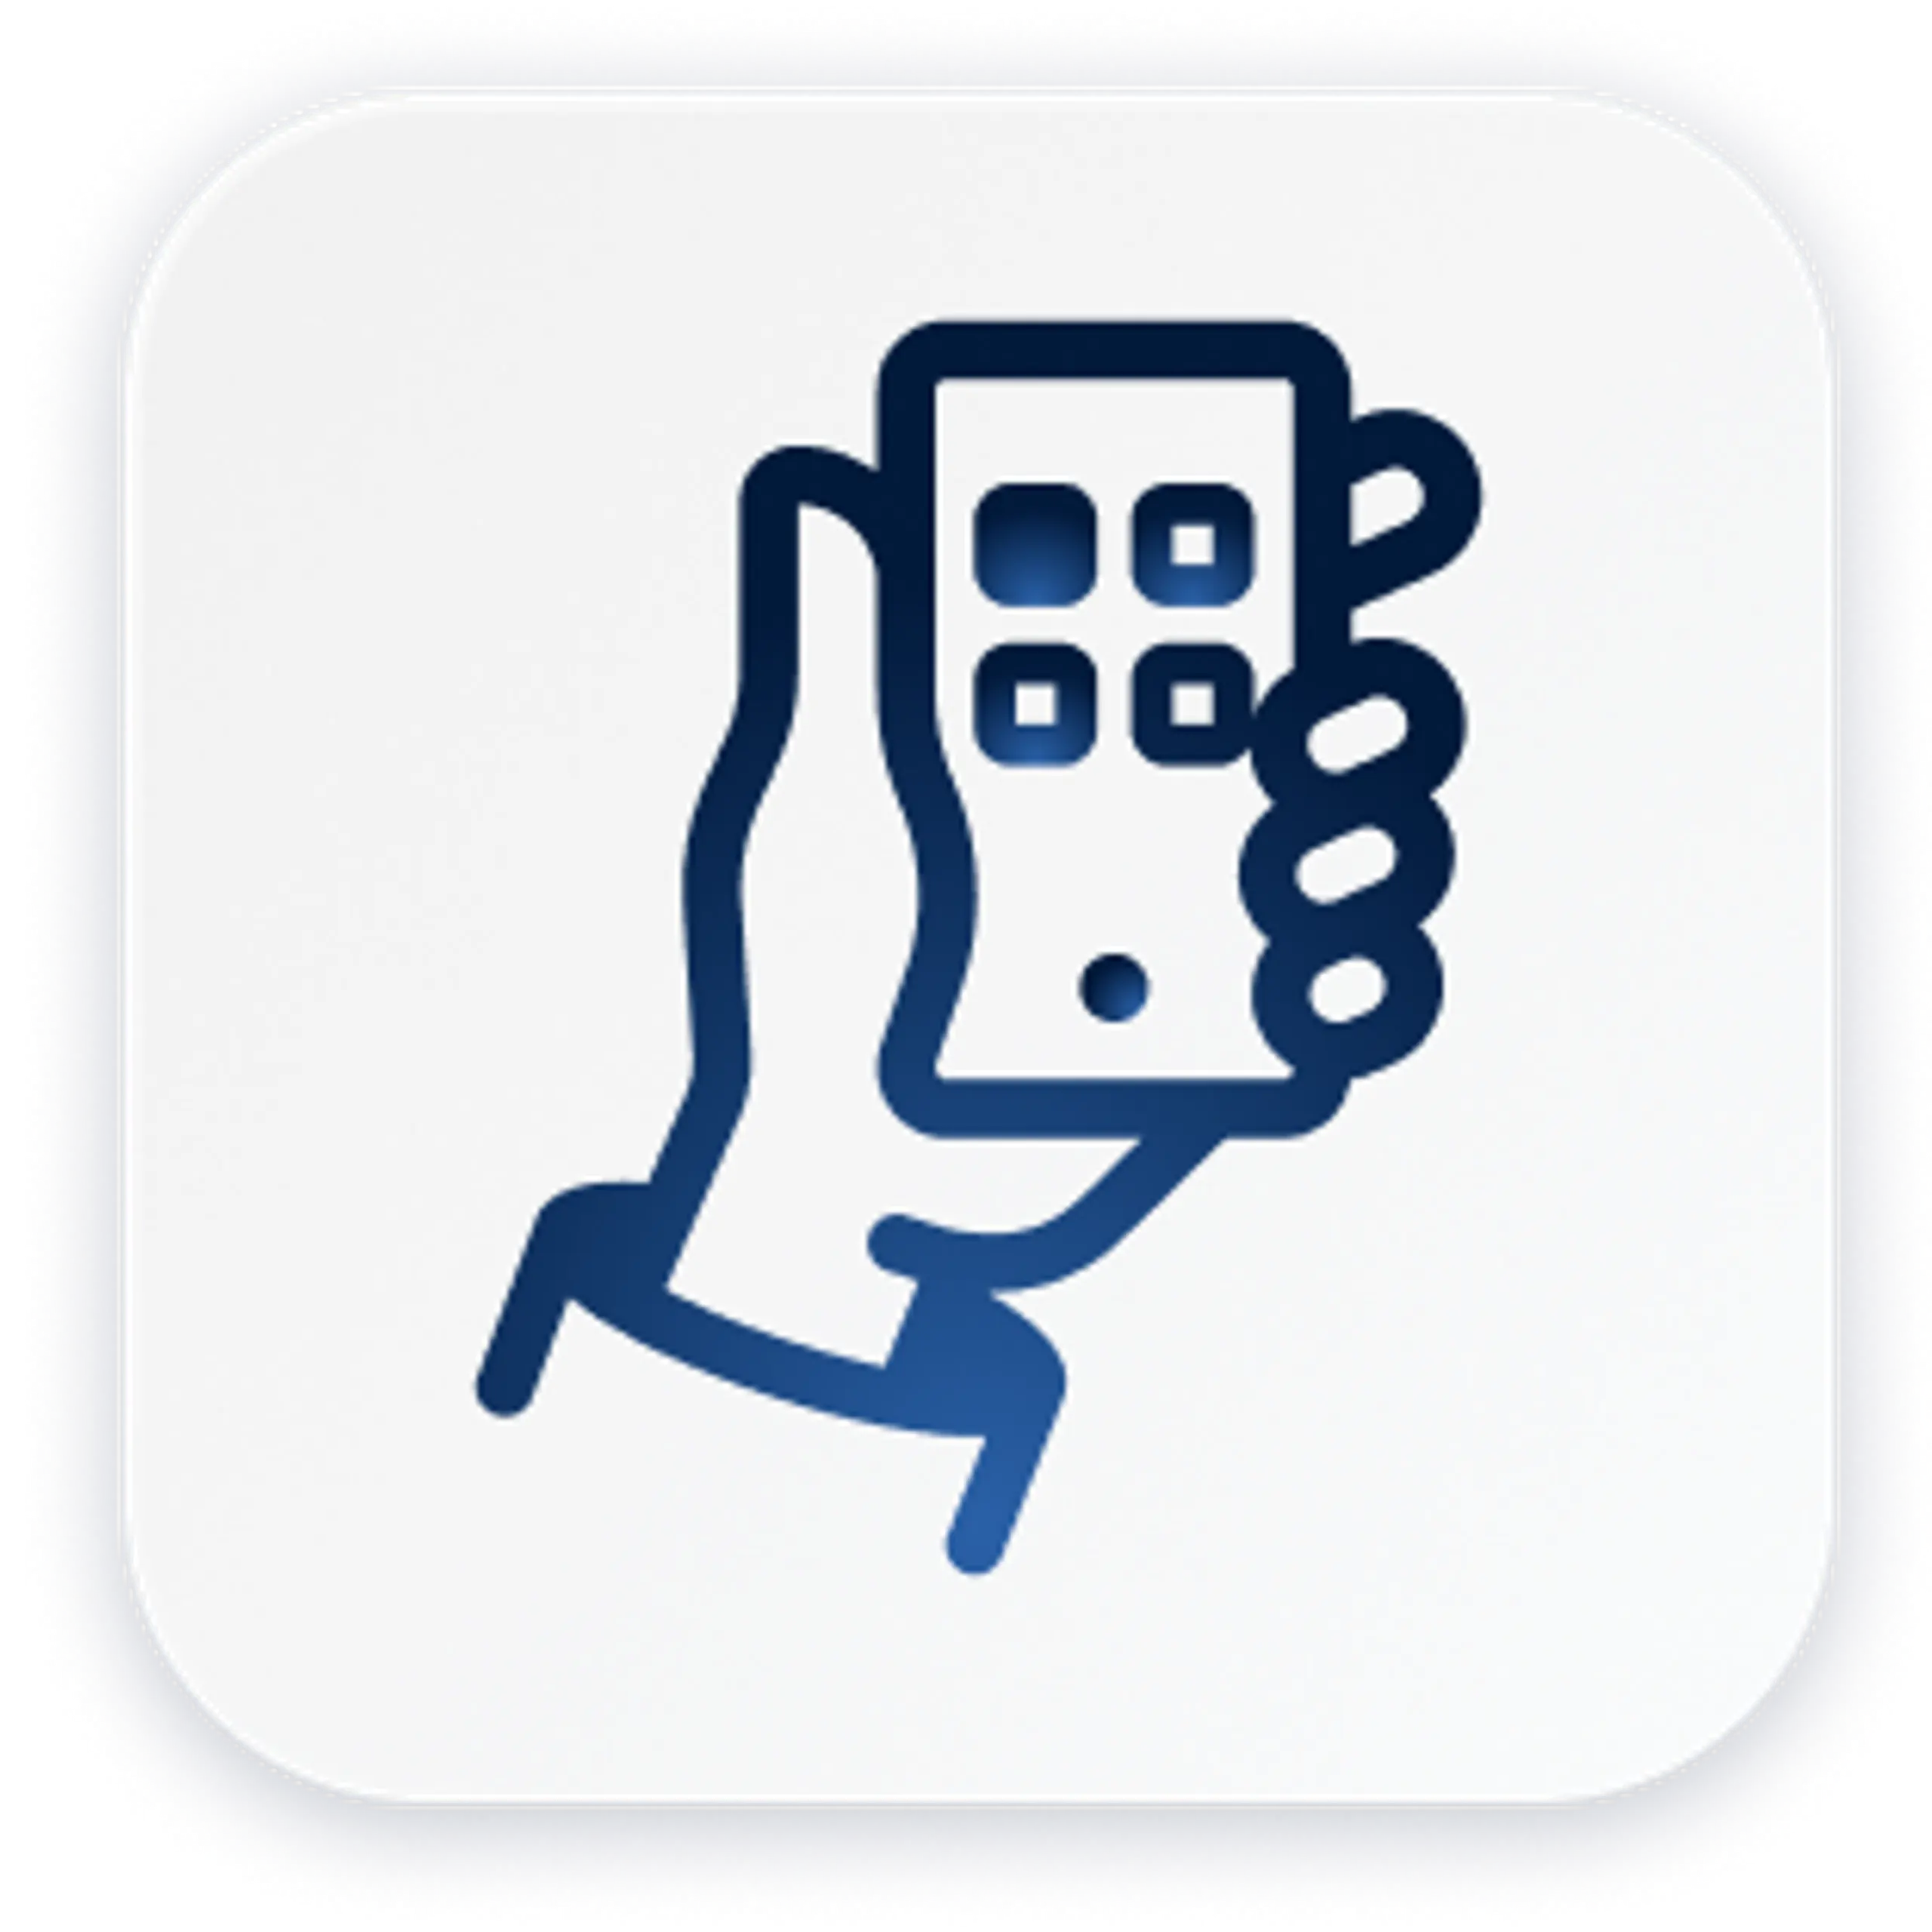 Icon showing someone holding a mobile phone to view barn conditions.